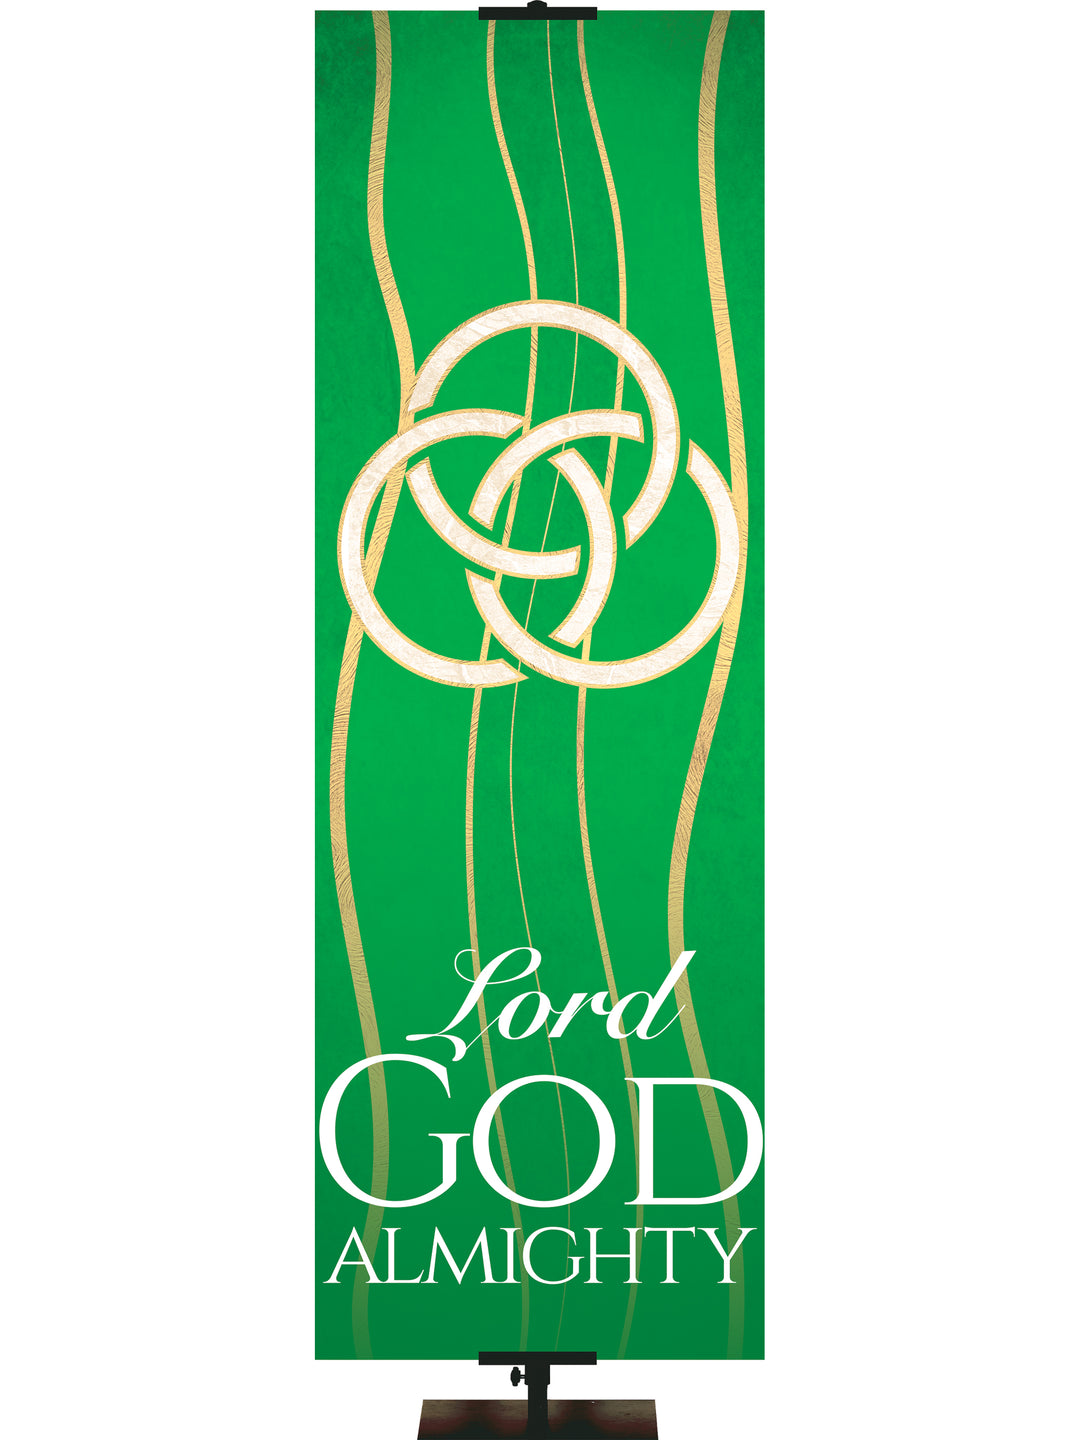 Experiencing God Symbols and Phrases Trinity, Lord God Almighty - Liturgical Banners - PraiseBanners